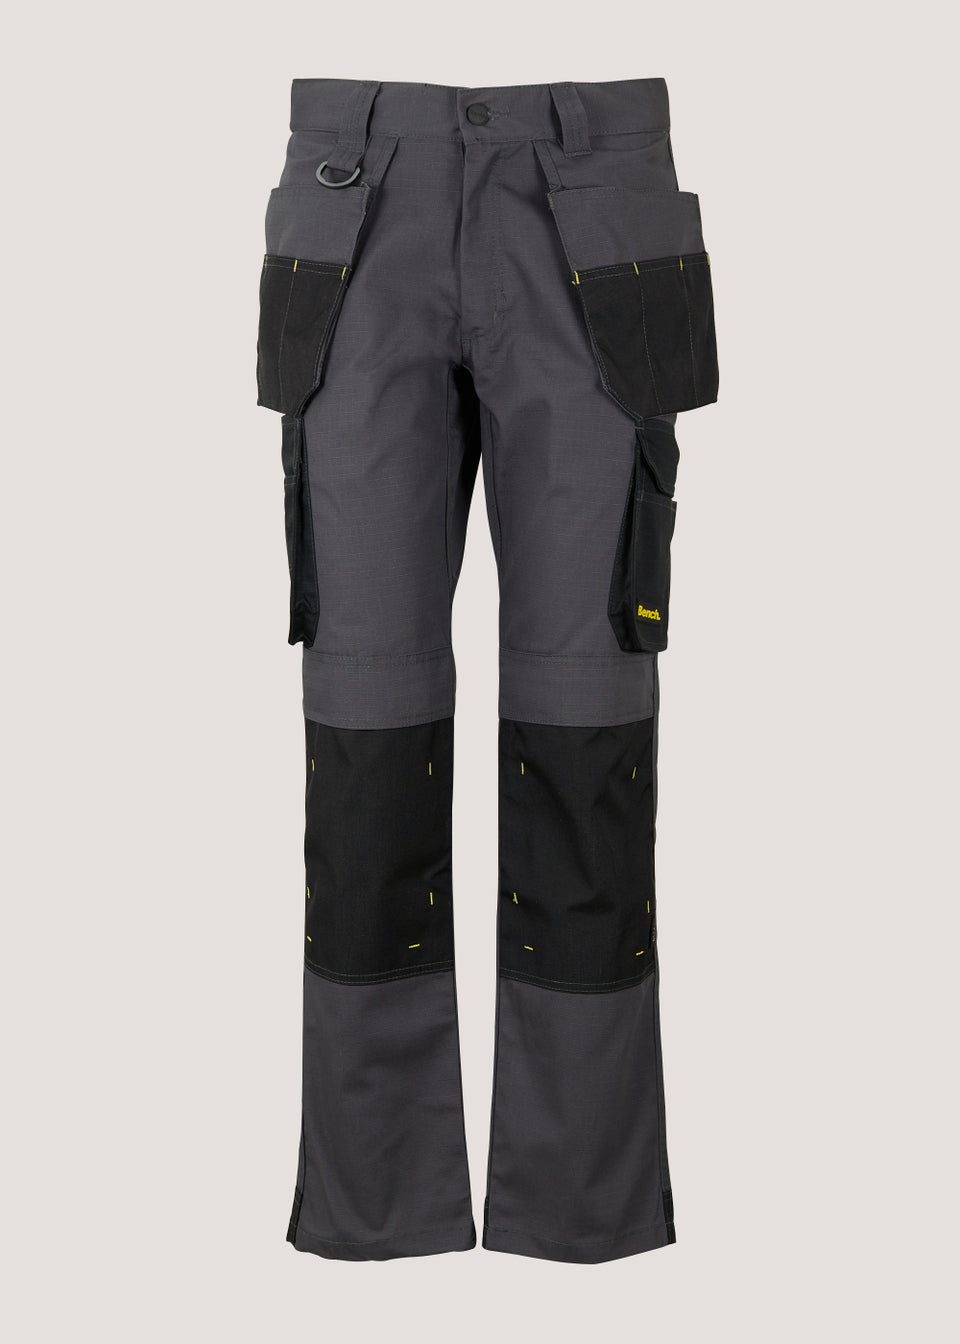 Bench Dallas Grey Holster Trousers